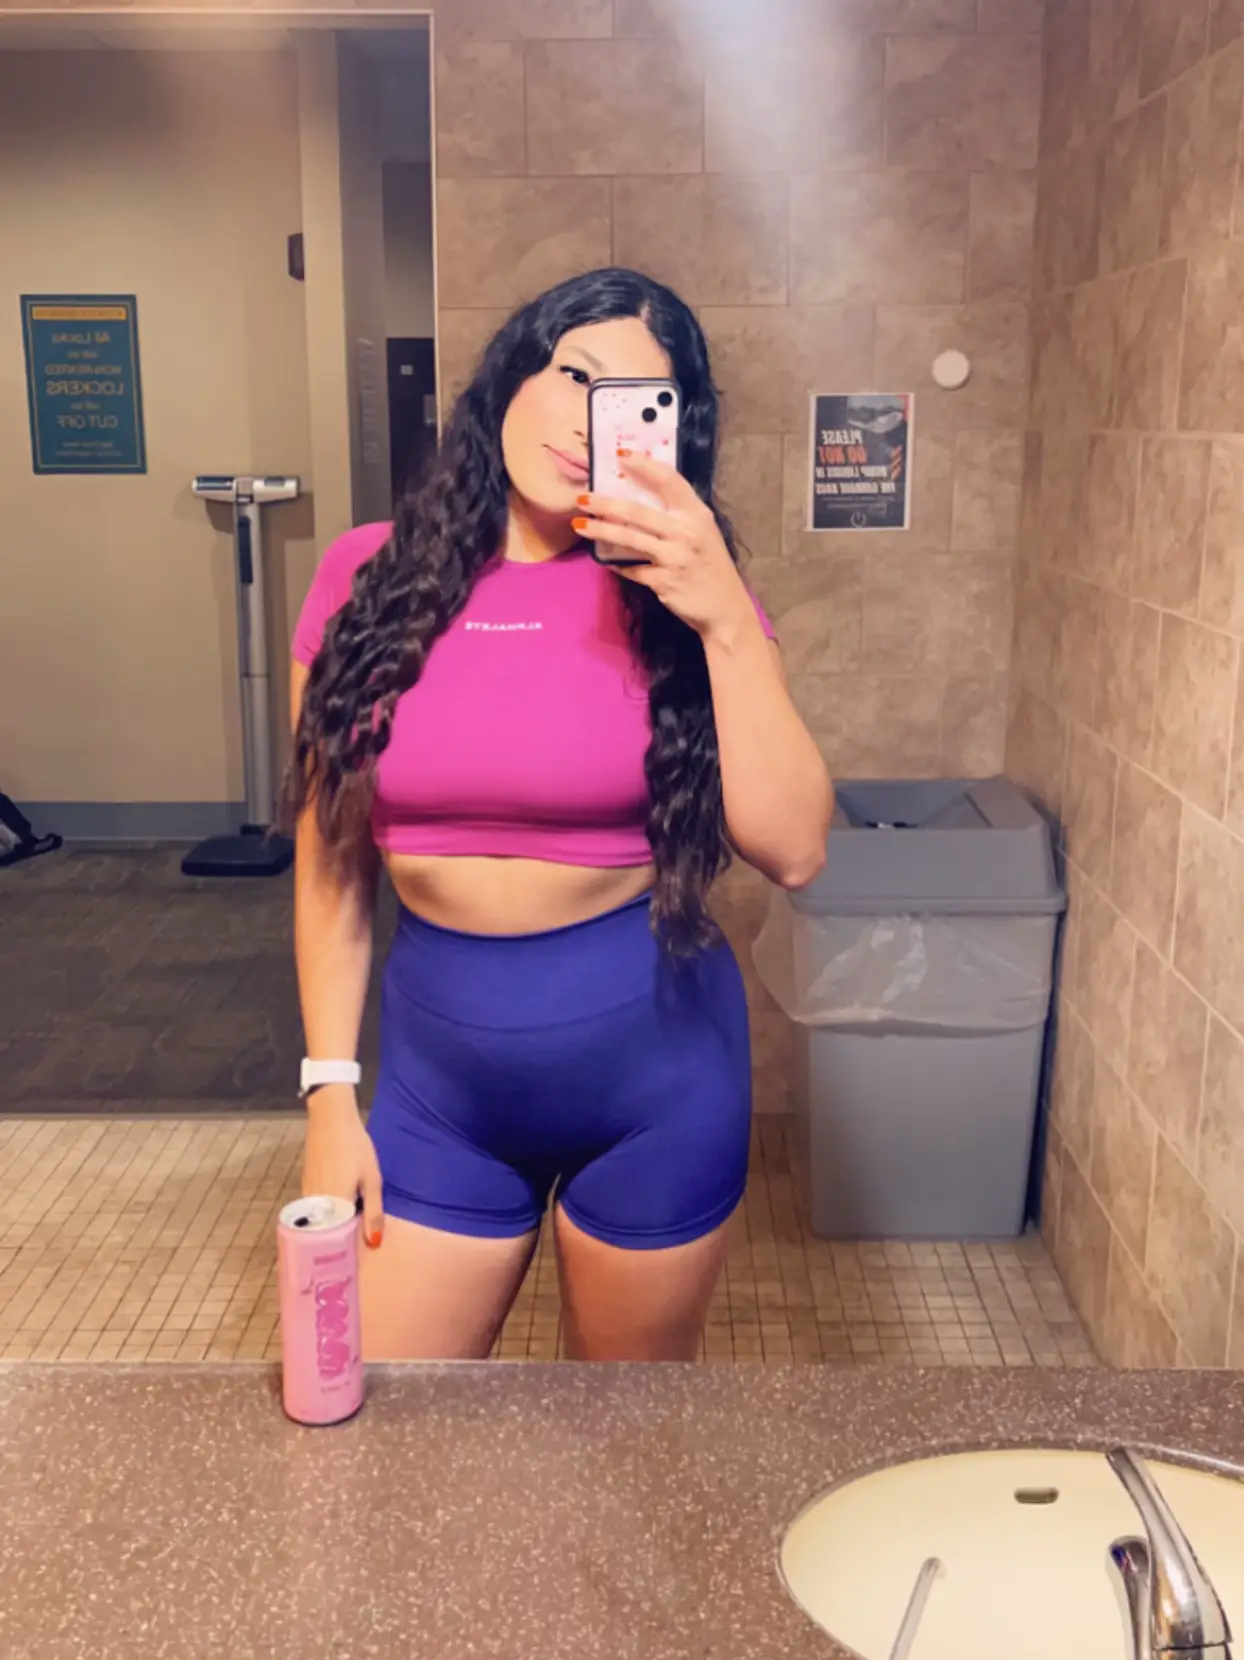 New Alphalete gym fit 💕🙌🏽, Gallery posted by Yana A.